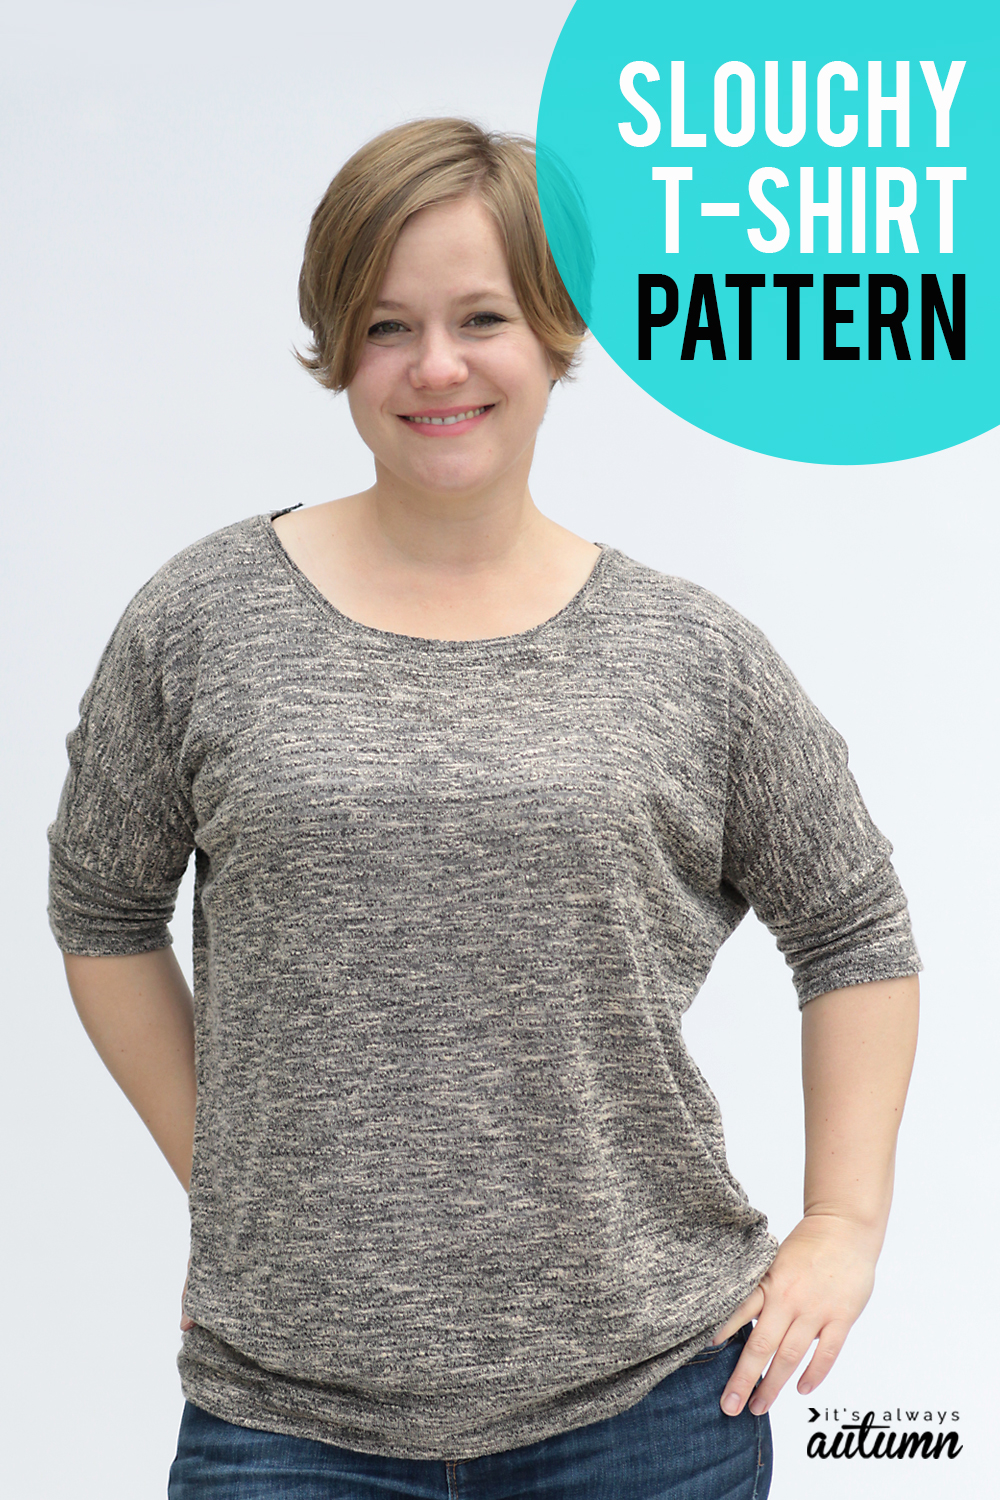 Slouchy batwing top pattern in size large with elbow length sleeves. This style looks great on all body types!